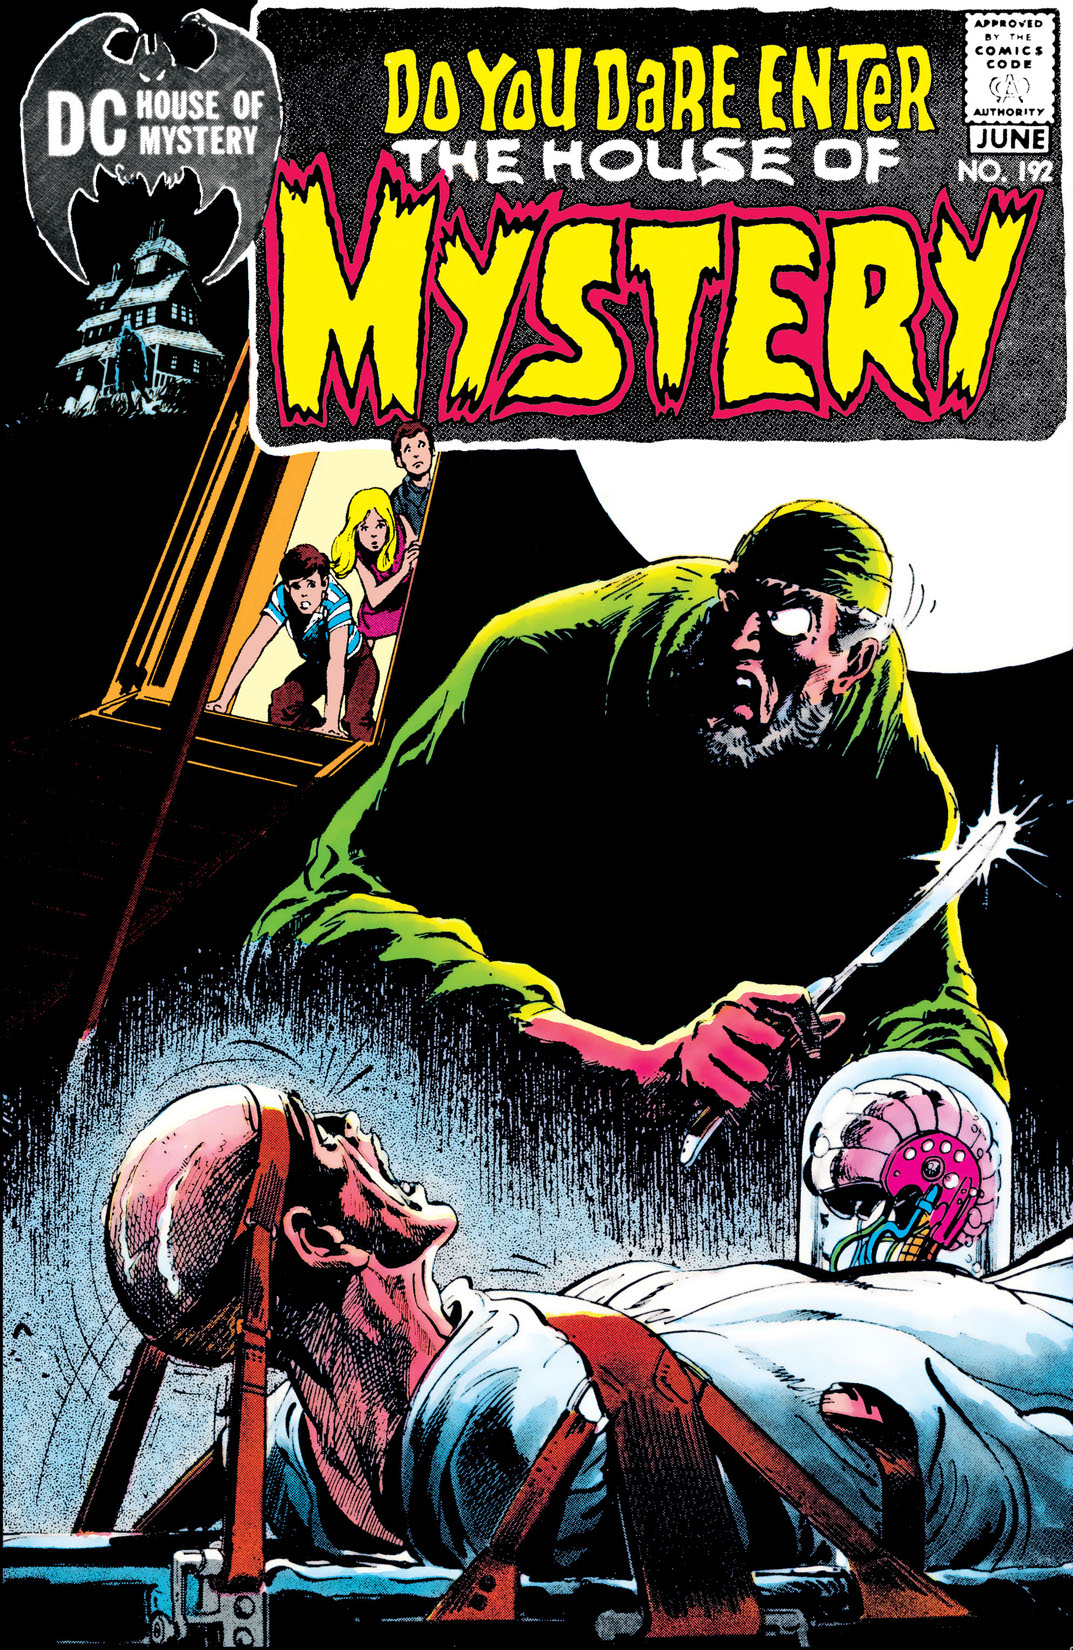 House of Mystery (1951-) #192 preview images